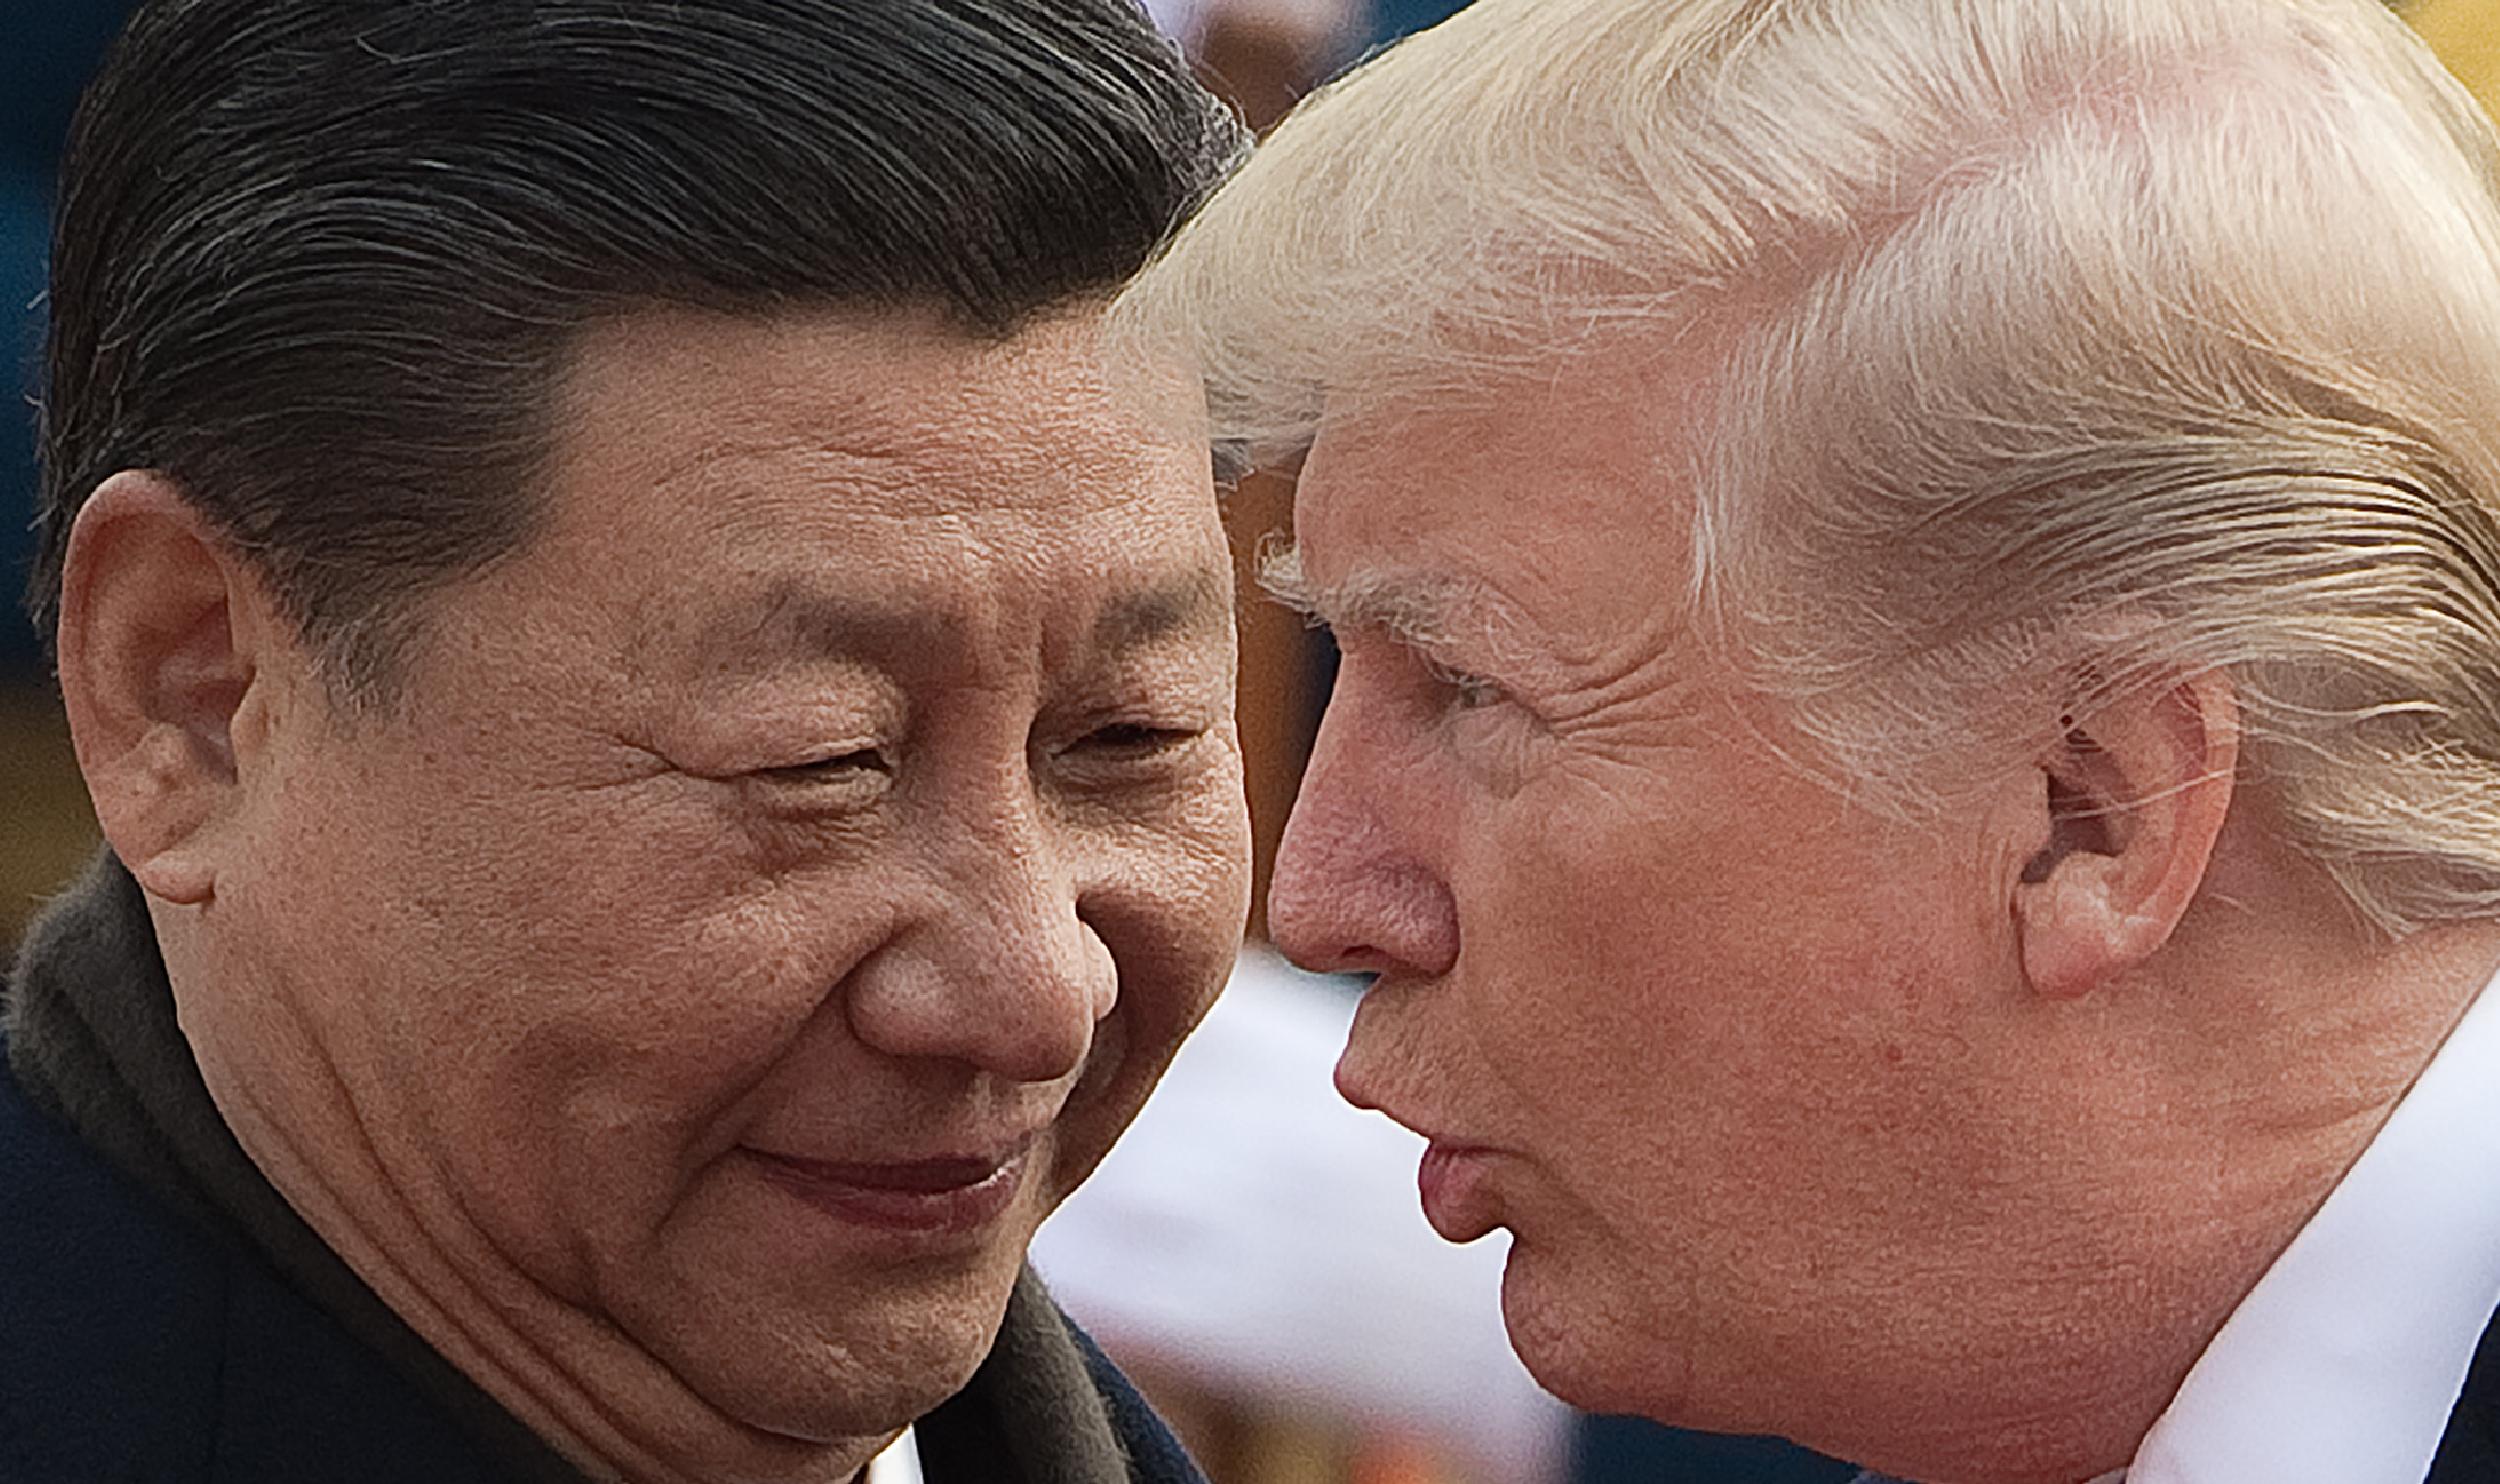 The trade war between Donald Trump and Xi Jinping's governments has escalated with the US imposing its largest round of tariffs against Chinese products yet.